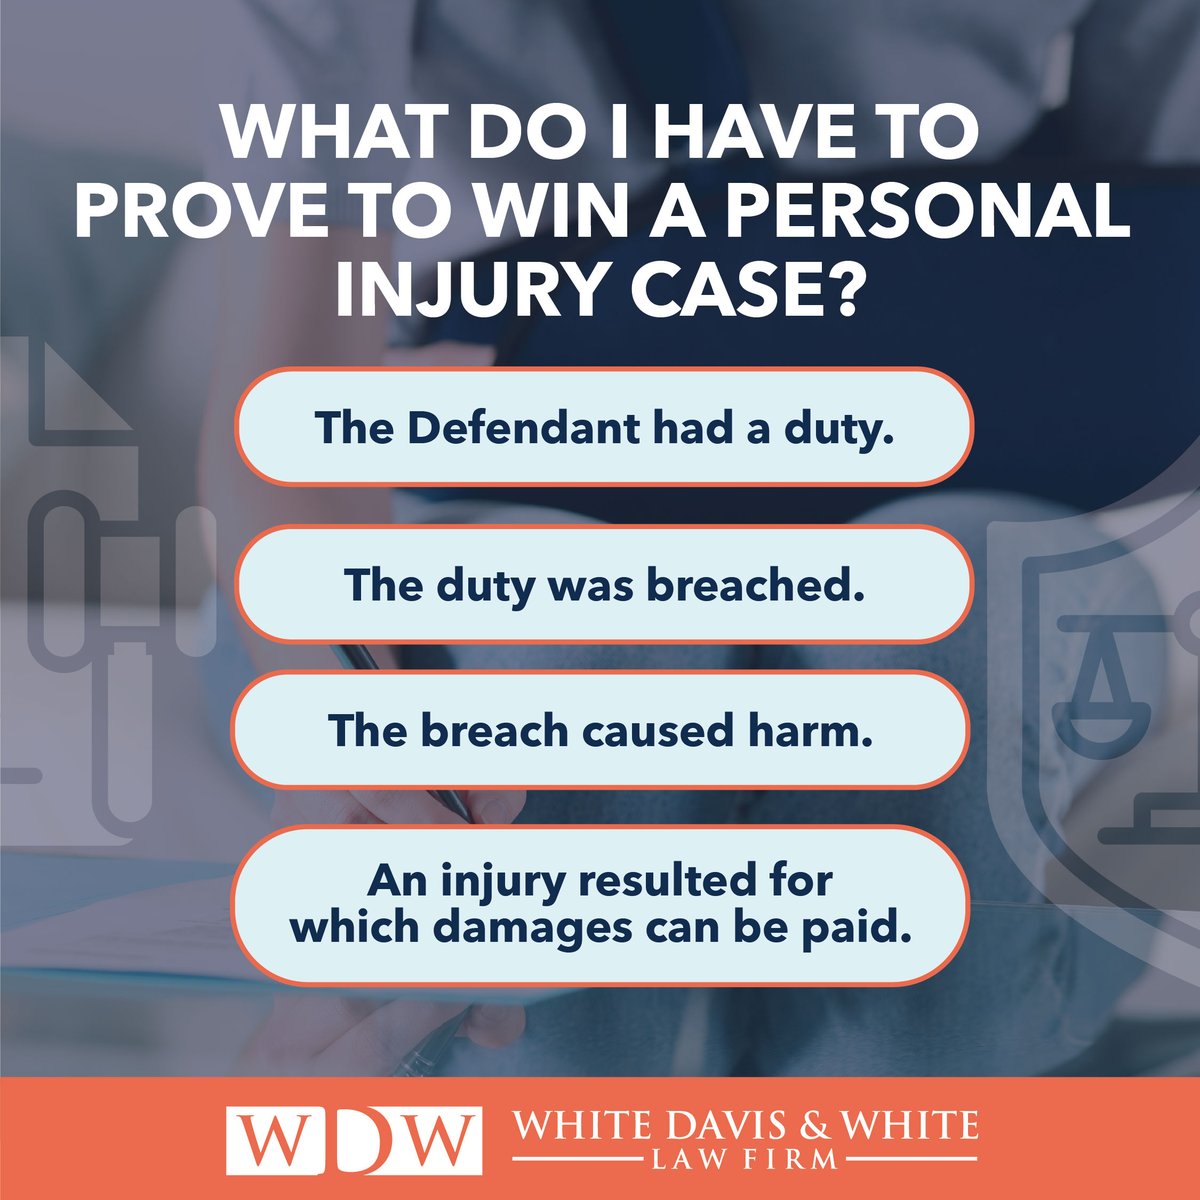 Curious about your case? Let's discuss winning strategies today.

864.231.8090 | WDWLawFirm.com

#WDWLawFirm #WhiteDavisandWhite #law #lawyer #legal #lawyers #attorney #lawfirm #lawyerlife #justice #SCLaw #attorneyatlaw #advocate #personalinjury #accidentlawyer